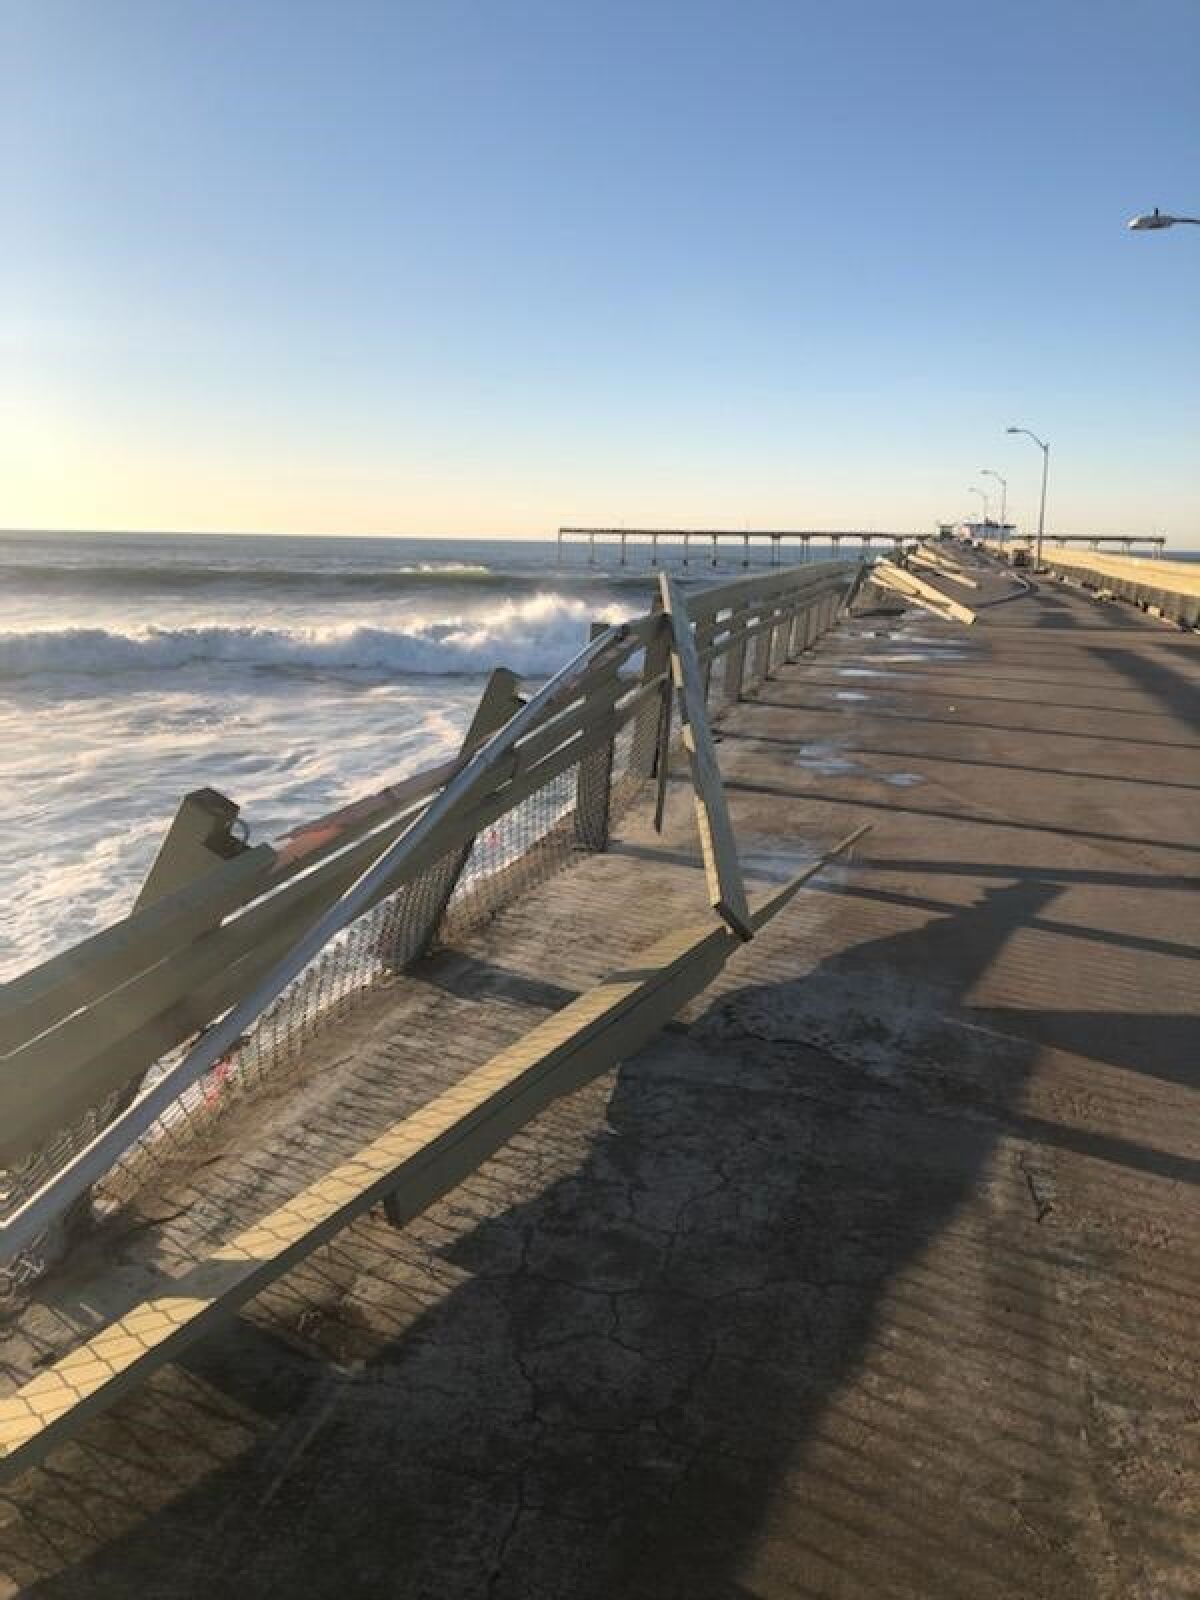 Railings on the south side of the Ocean Beach Pier were damaged by high surf Jan. 11.